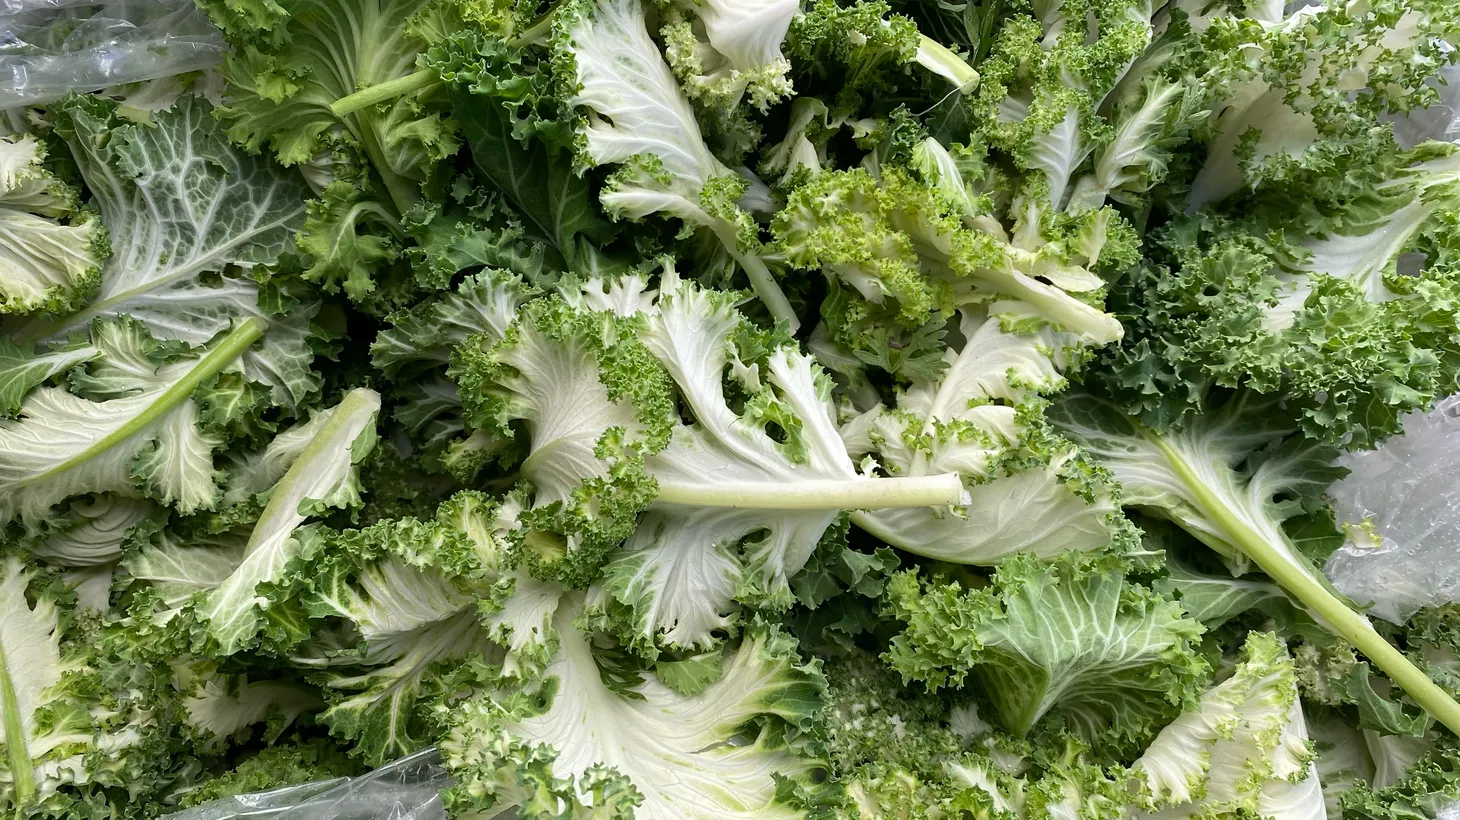 Casper kale is on the table from County Line Harvest at the Wednesday Santa Monica Farmer’s Market.